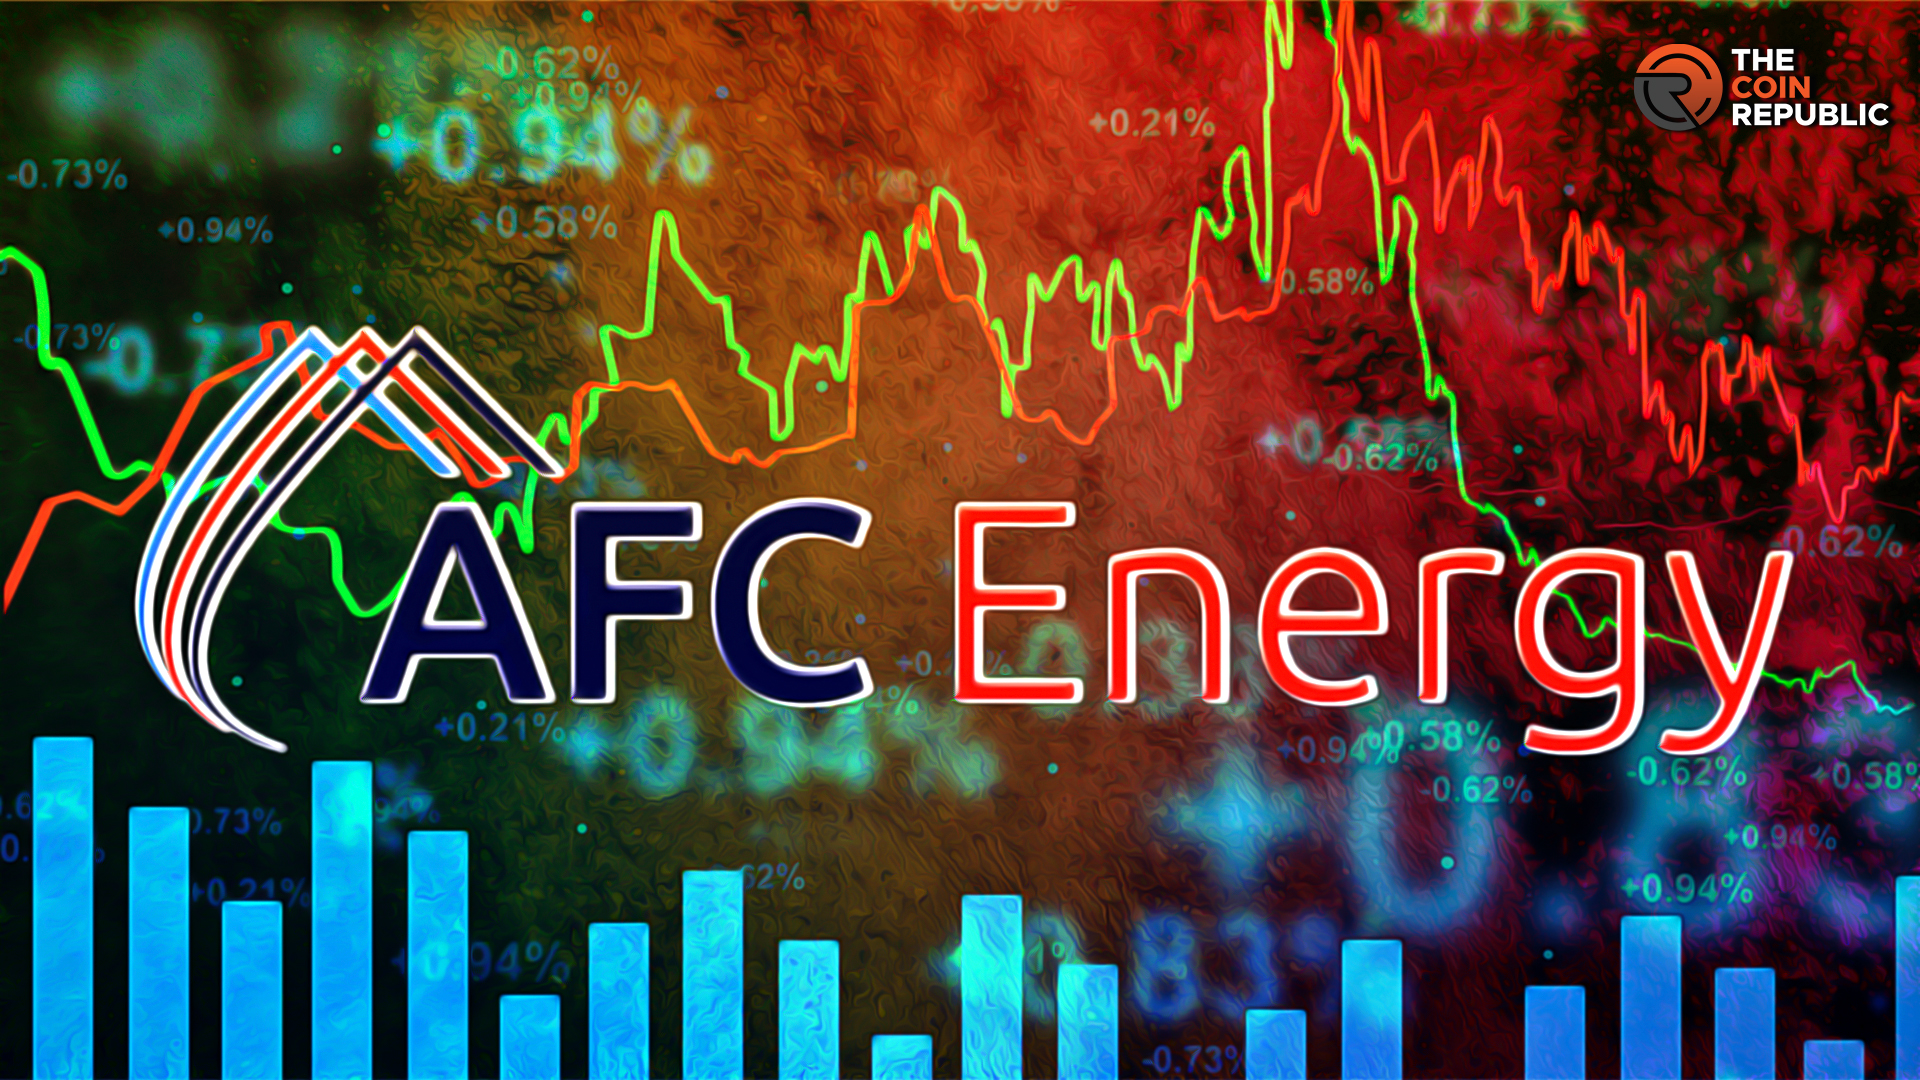 AFC Stock Price: Downtrend Broken, Stock Rises, is It the Chance?